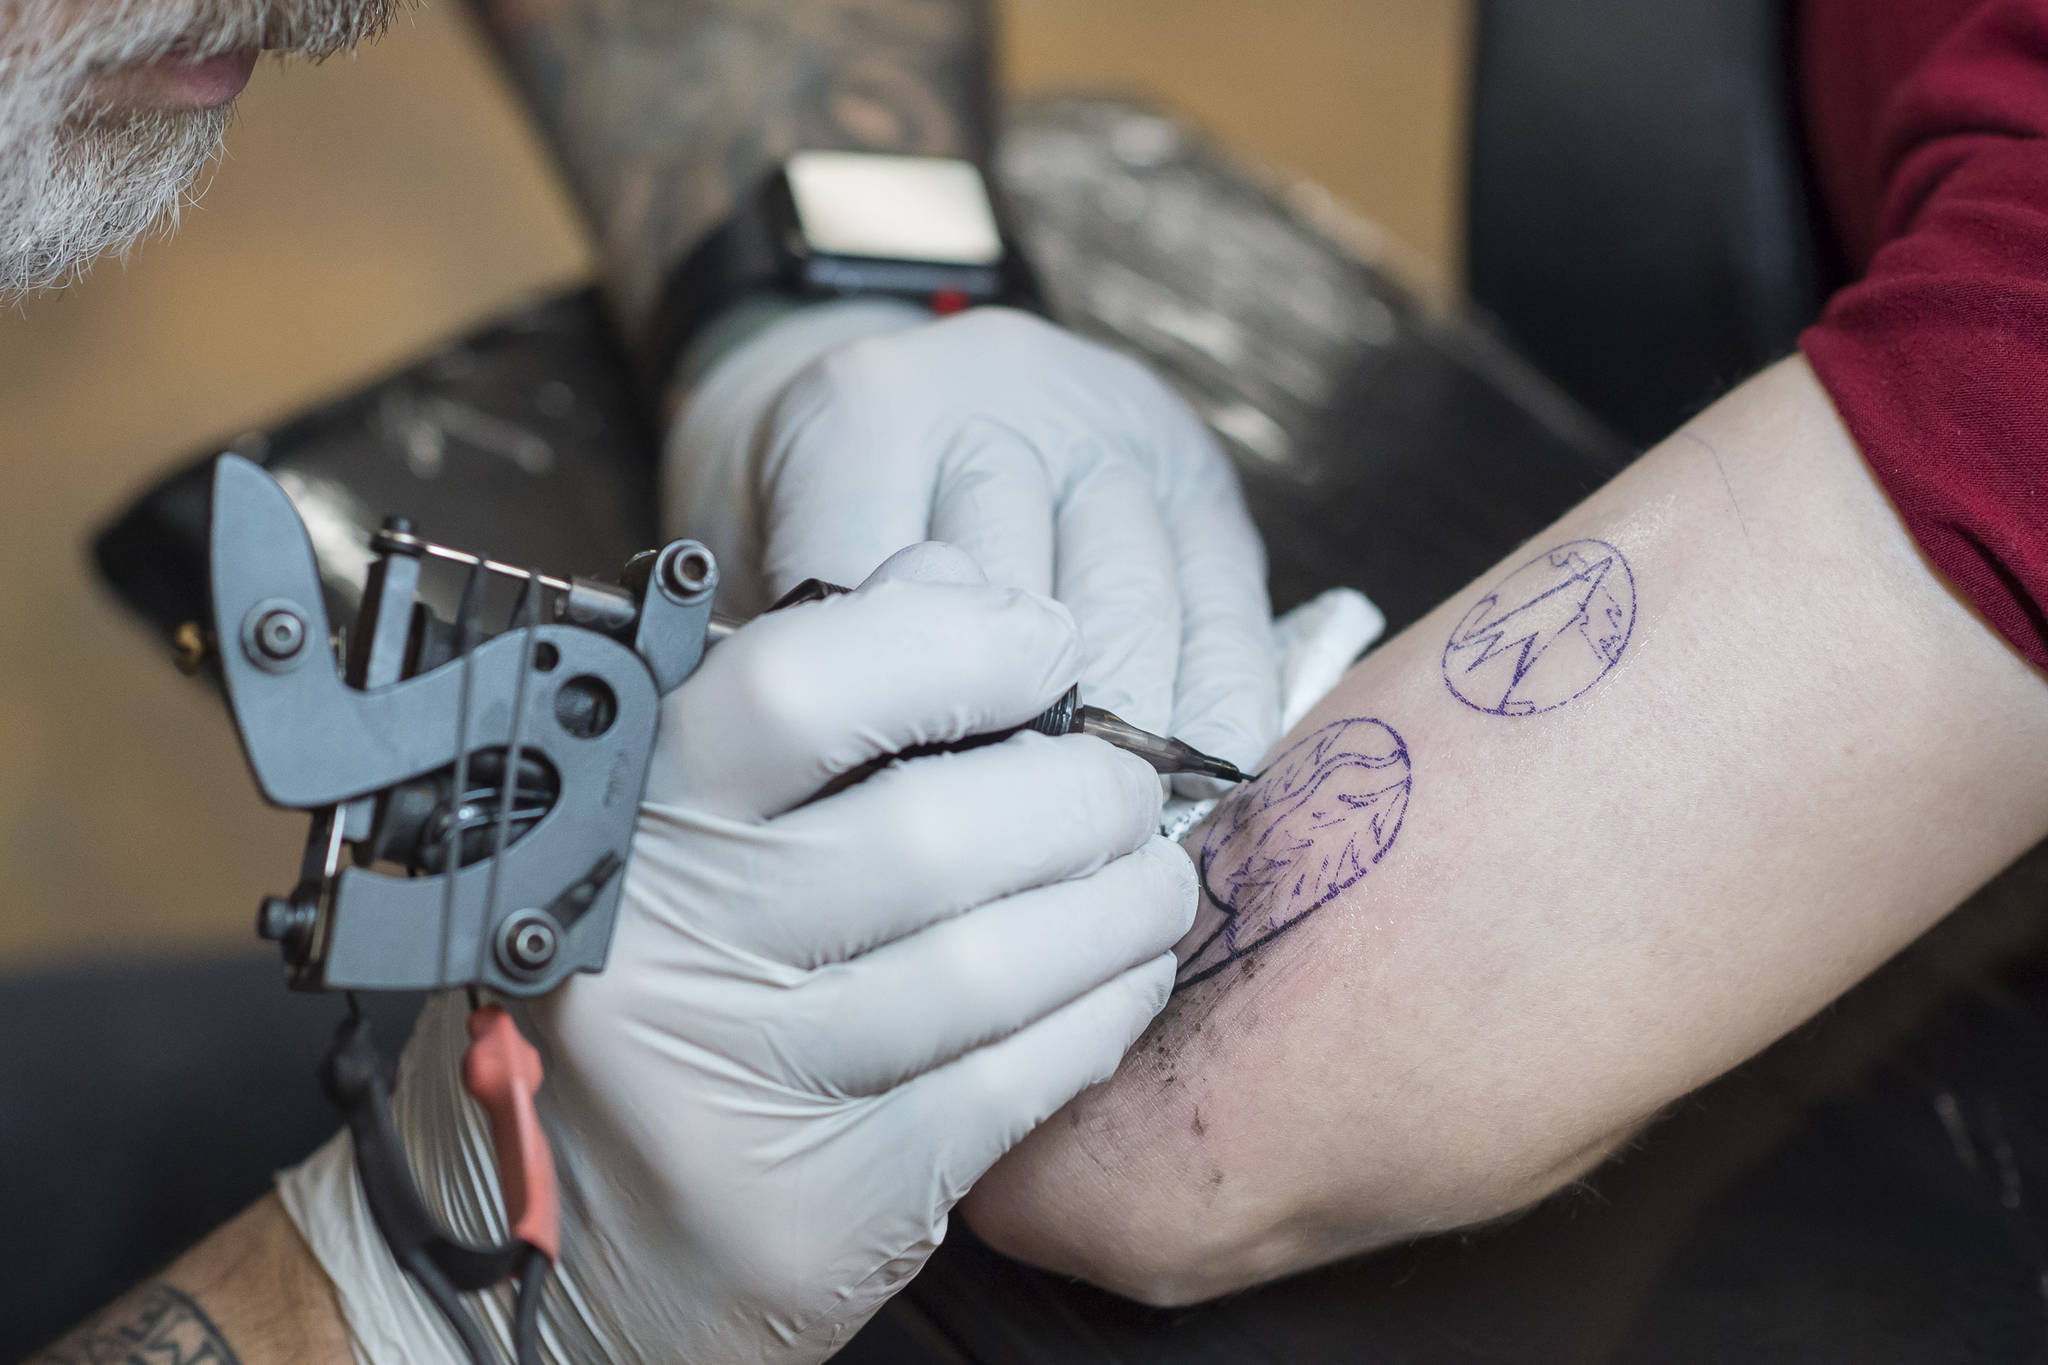 Tattoo artist Mario Singh applies a stylized semicolon to the back of Amy Ridle’s upper arm at Taku Tattoo on Monday, Nov. 19, 2018. (Michael Penn | Juneau Empire)